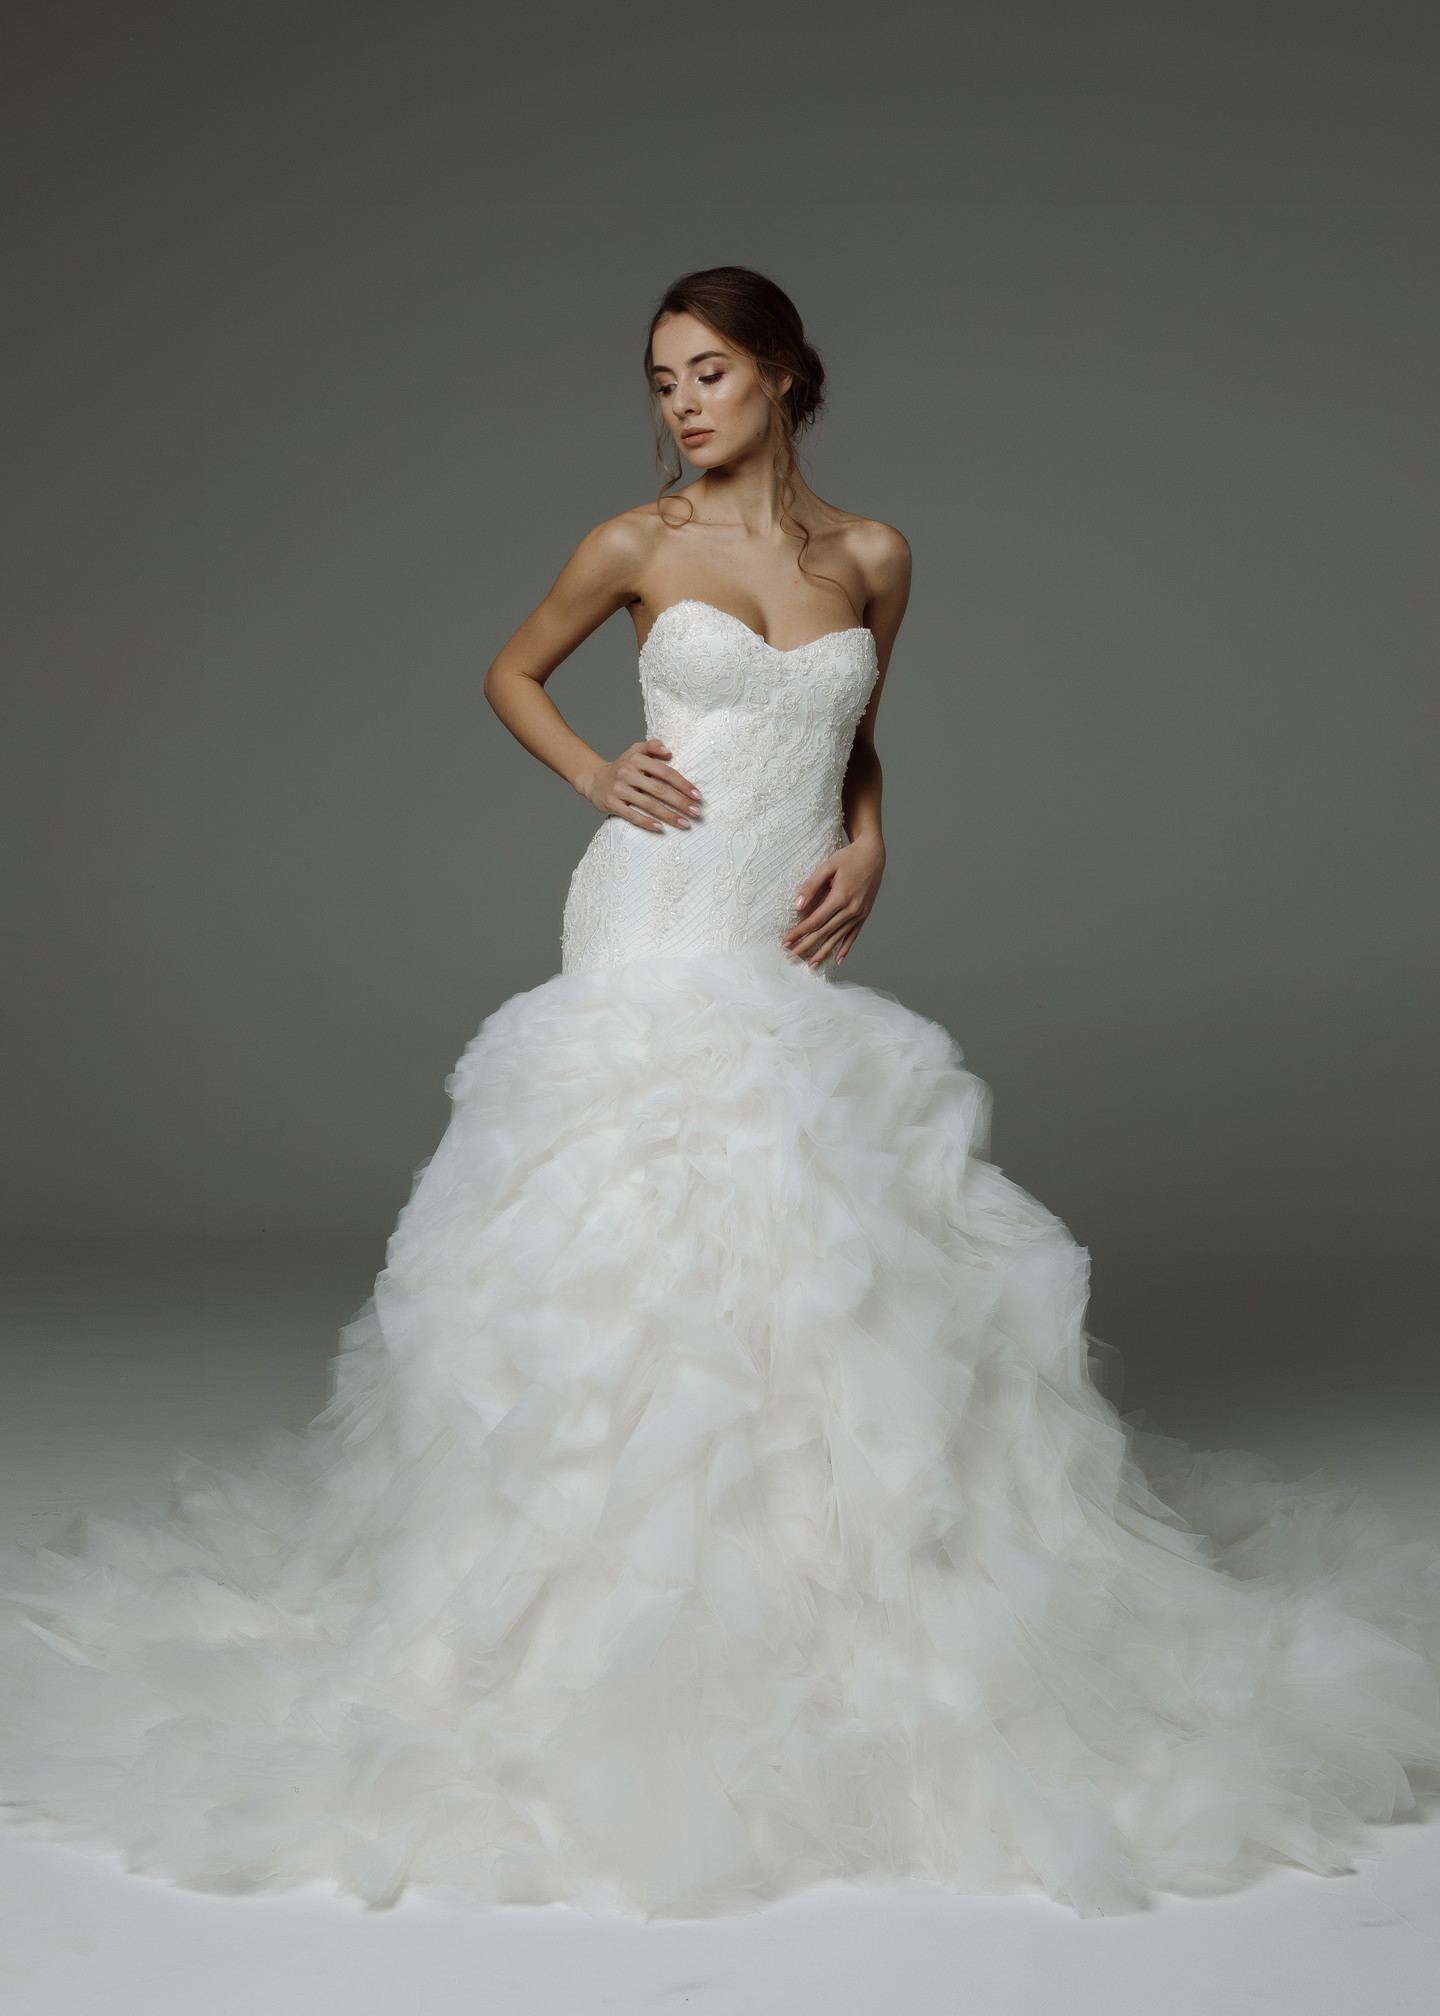 Jacqueline gown, 2019, couture, dress, bridal, off-white, tulle, embroidery, train, lacing corset, mermaid, archive